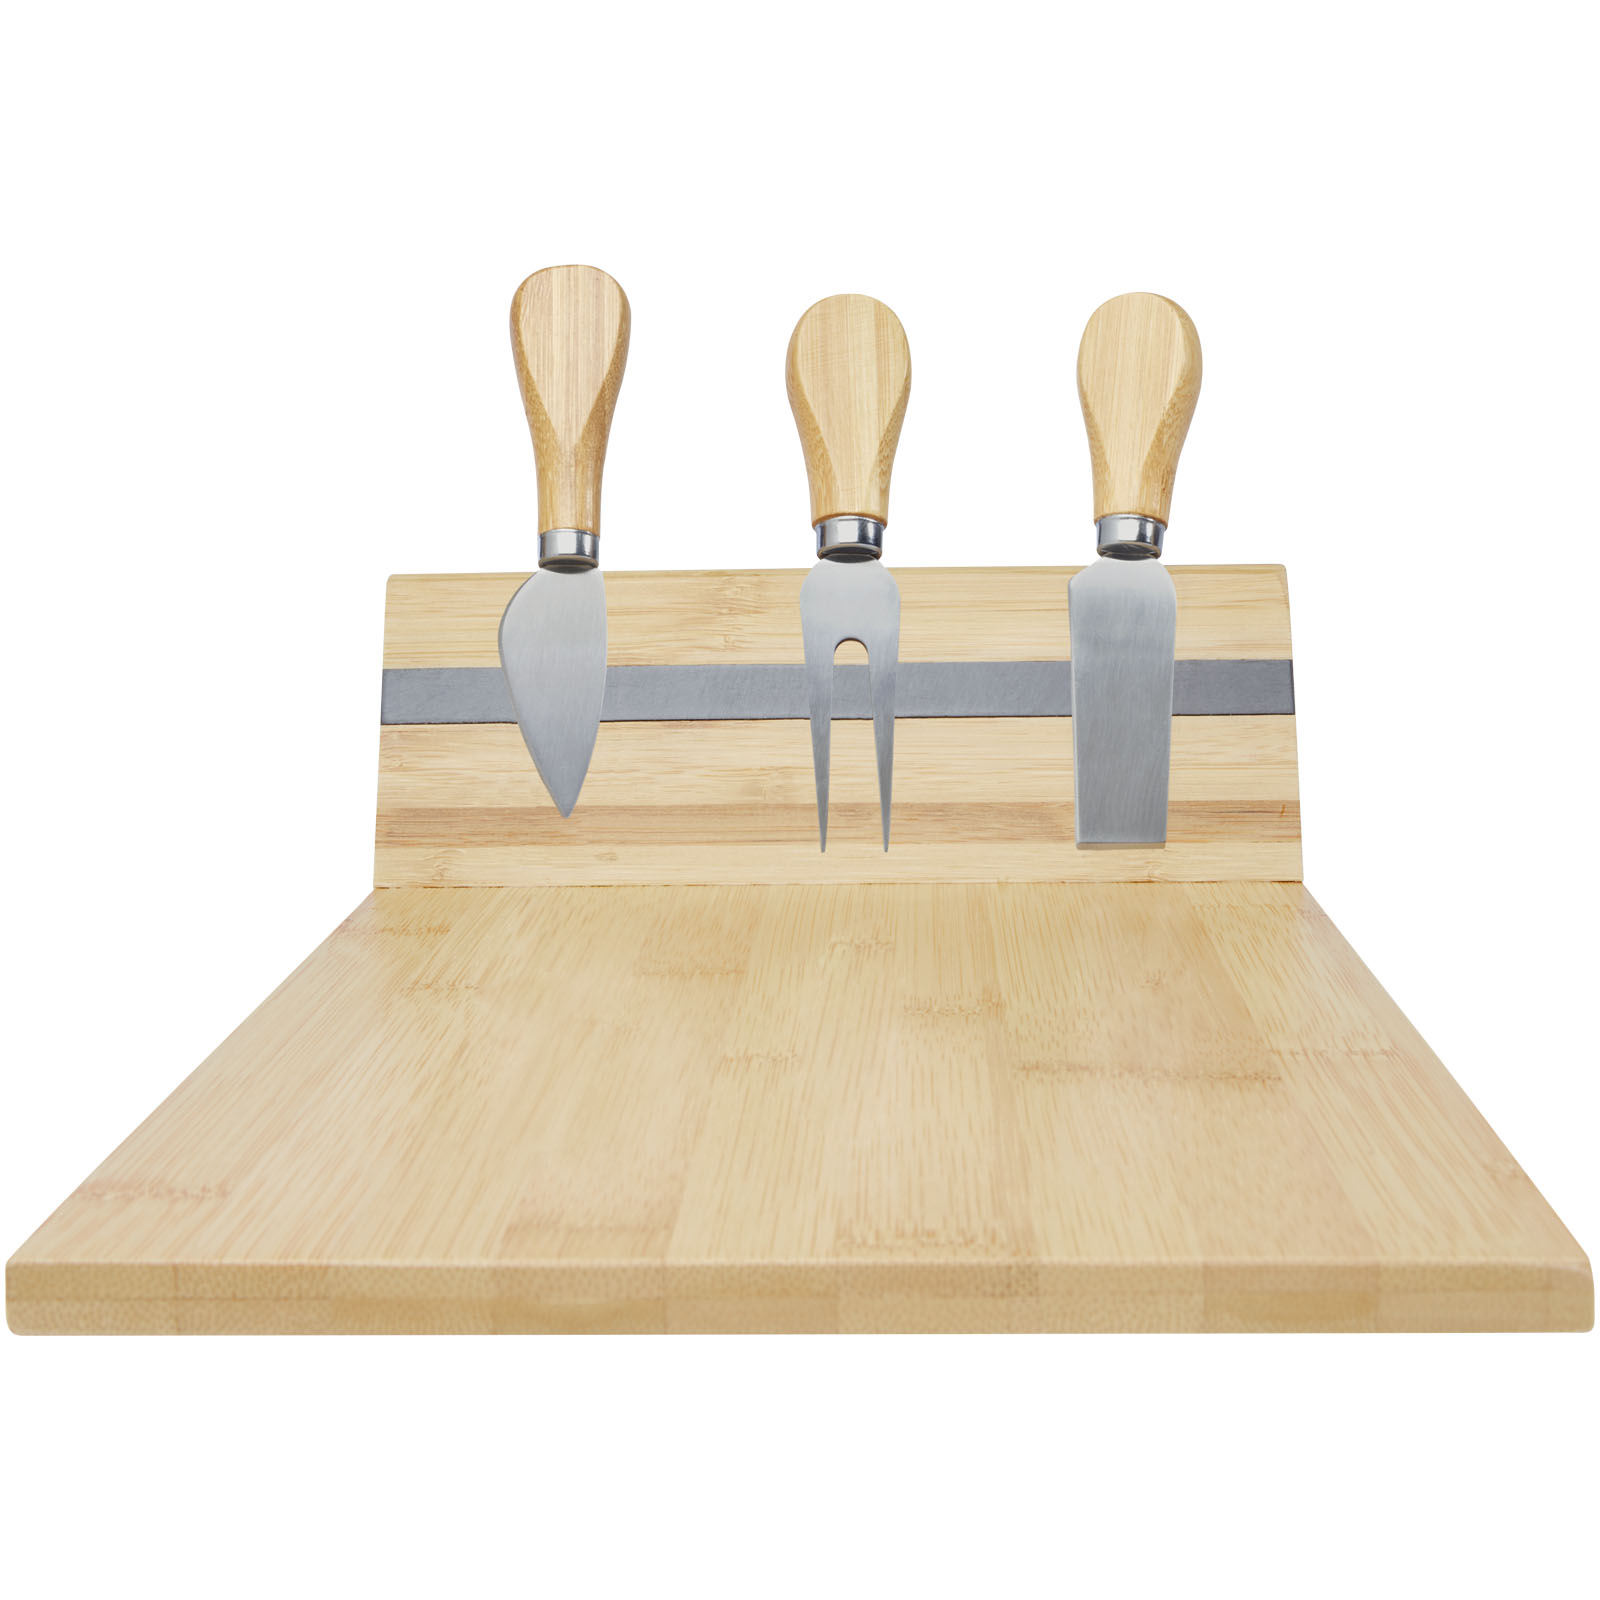 Advertising Serving Sets - Mancheg bamboo magnetic cheese board and tools - 1